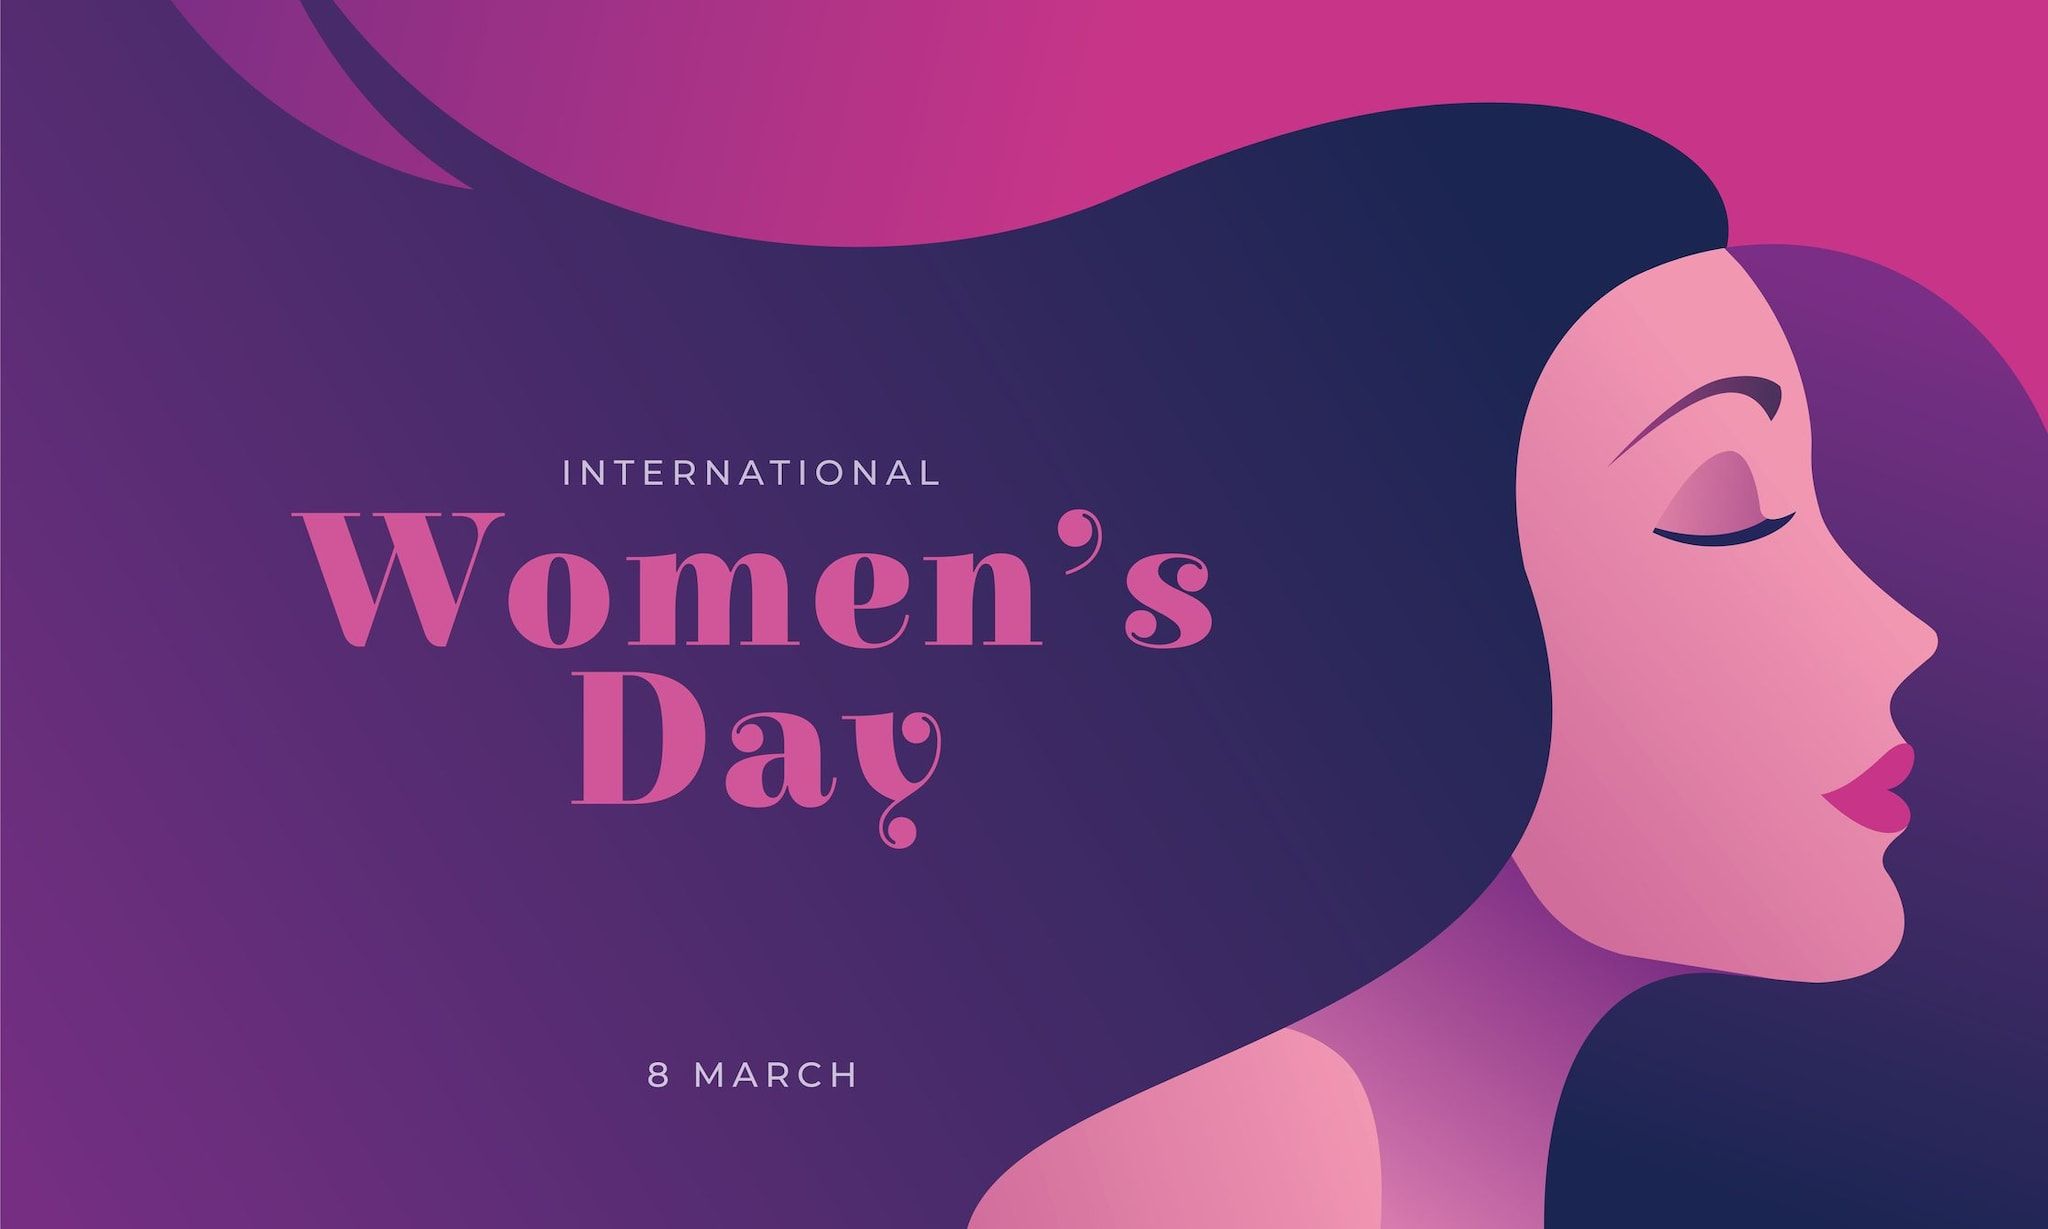 Happy Women's Day image and Gifs for the wishes of March 8th